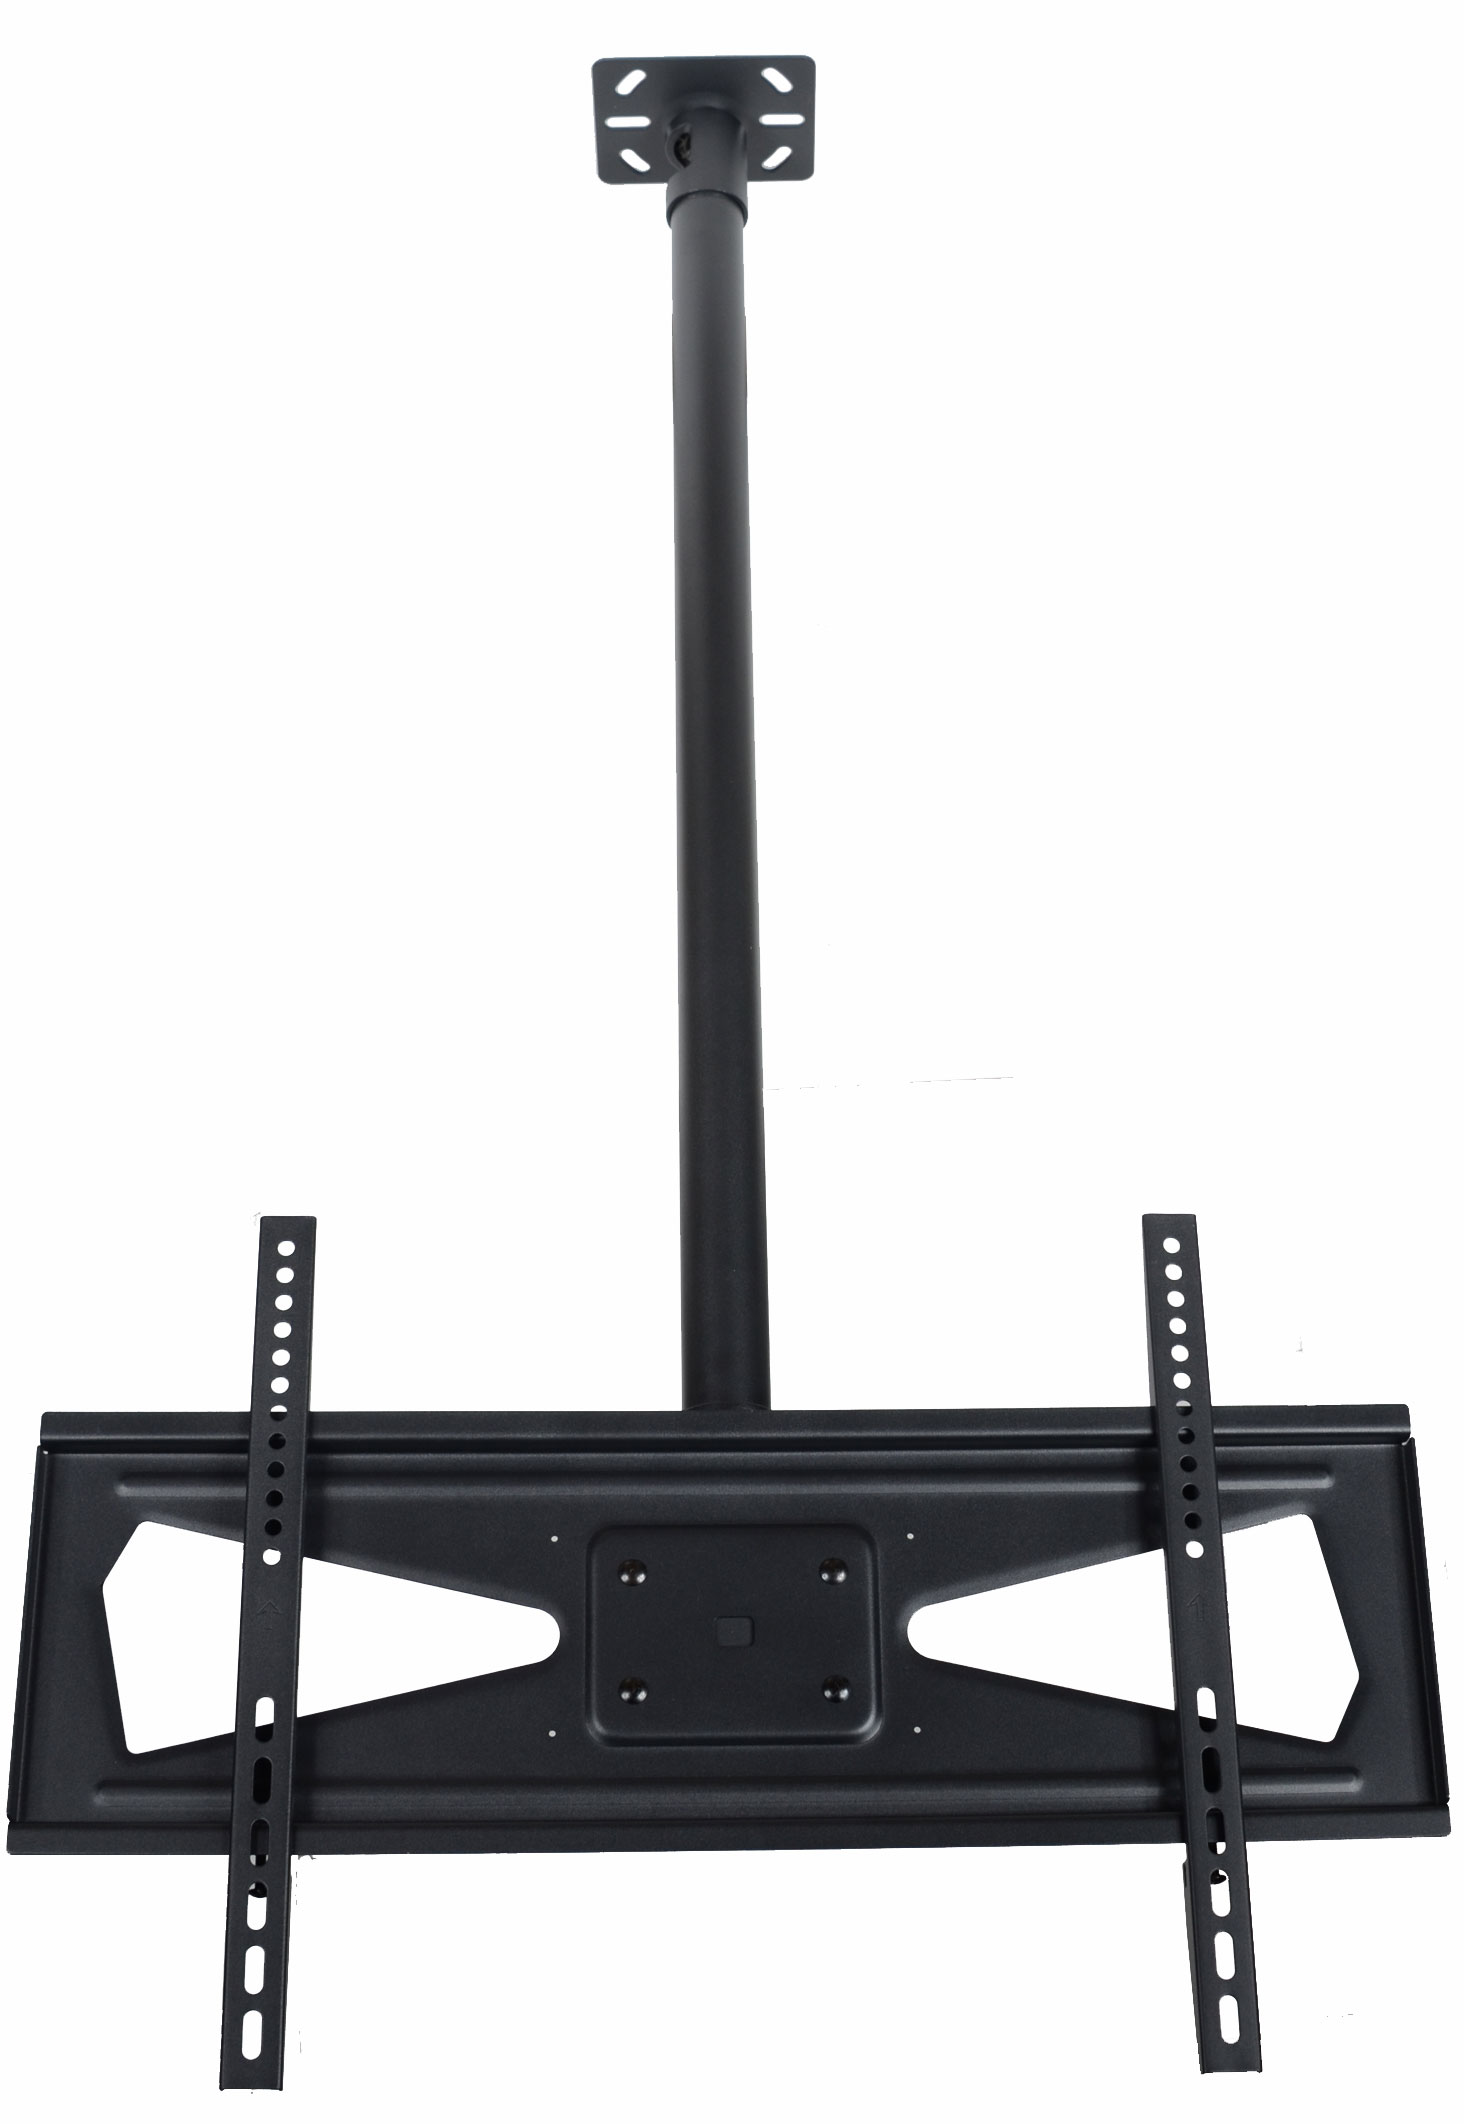 VideoSecu Tilt TV Ceiling Mount for 37 39 40 42 43 46 47 48 50 55 60 65" LCD LED Plasma with 900mm Fixed Height Pole b37 - image 1 of 4